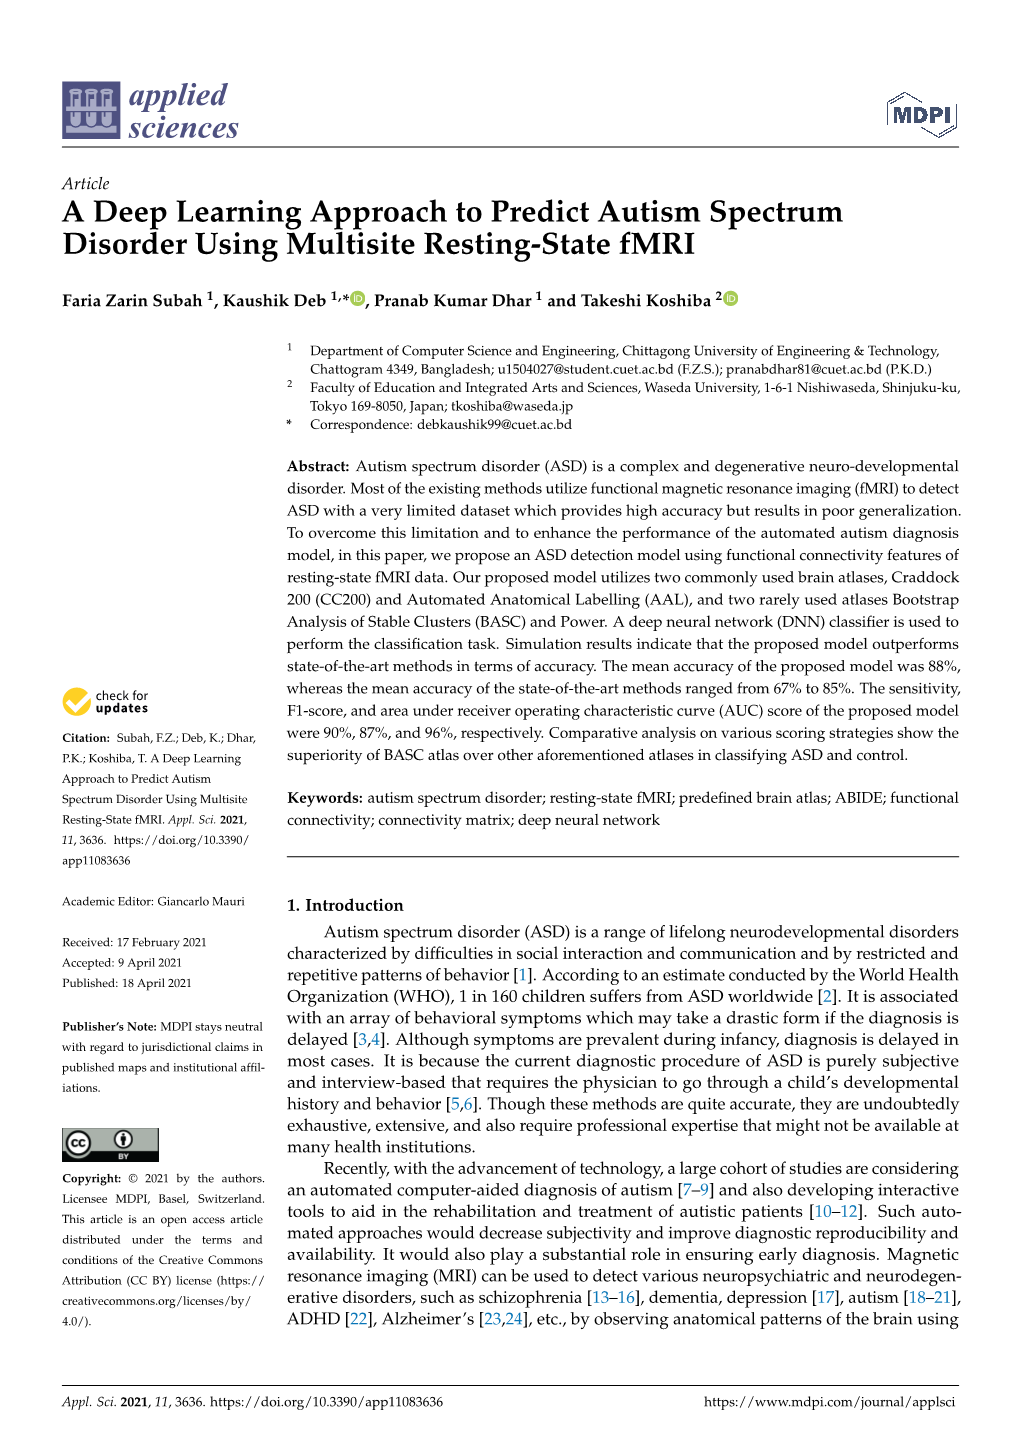 A Deep Learning Approach to Predict Autism Spectrum Disorder Using Multisite Resting-State Fmri